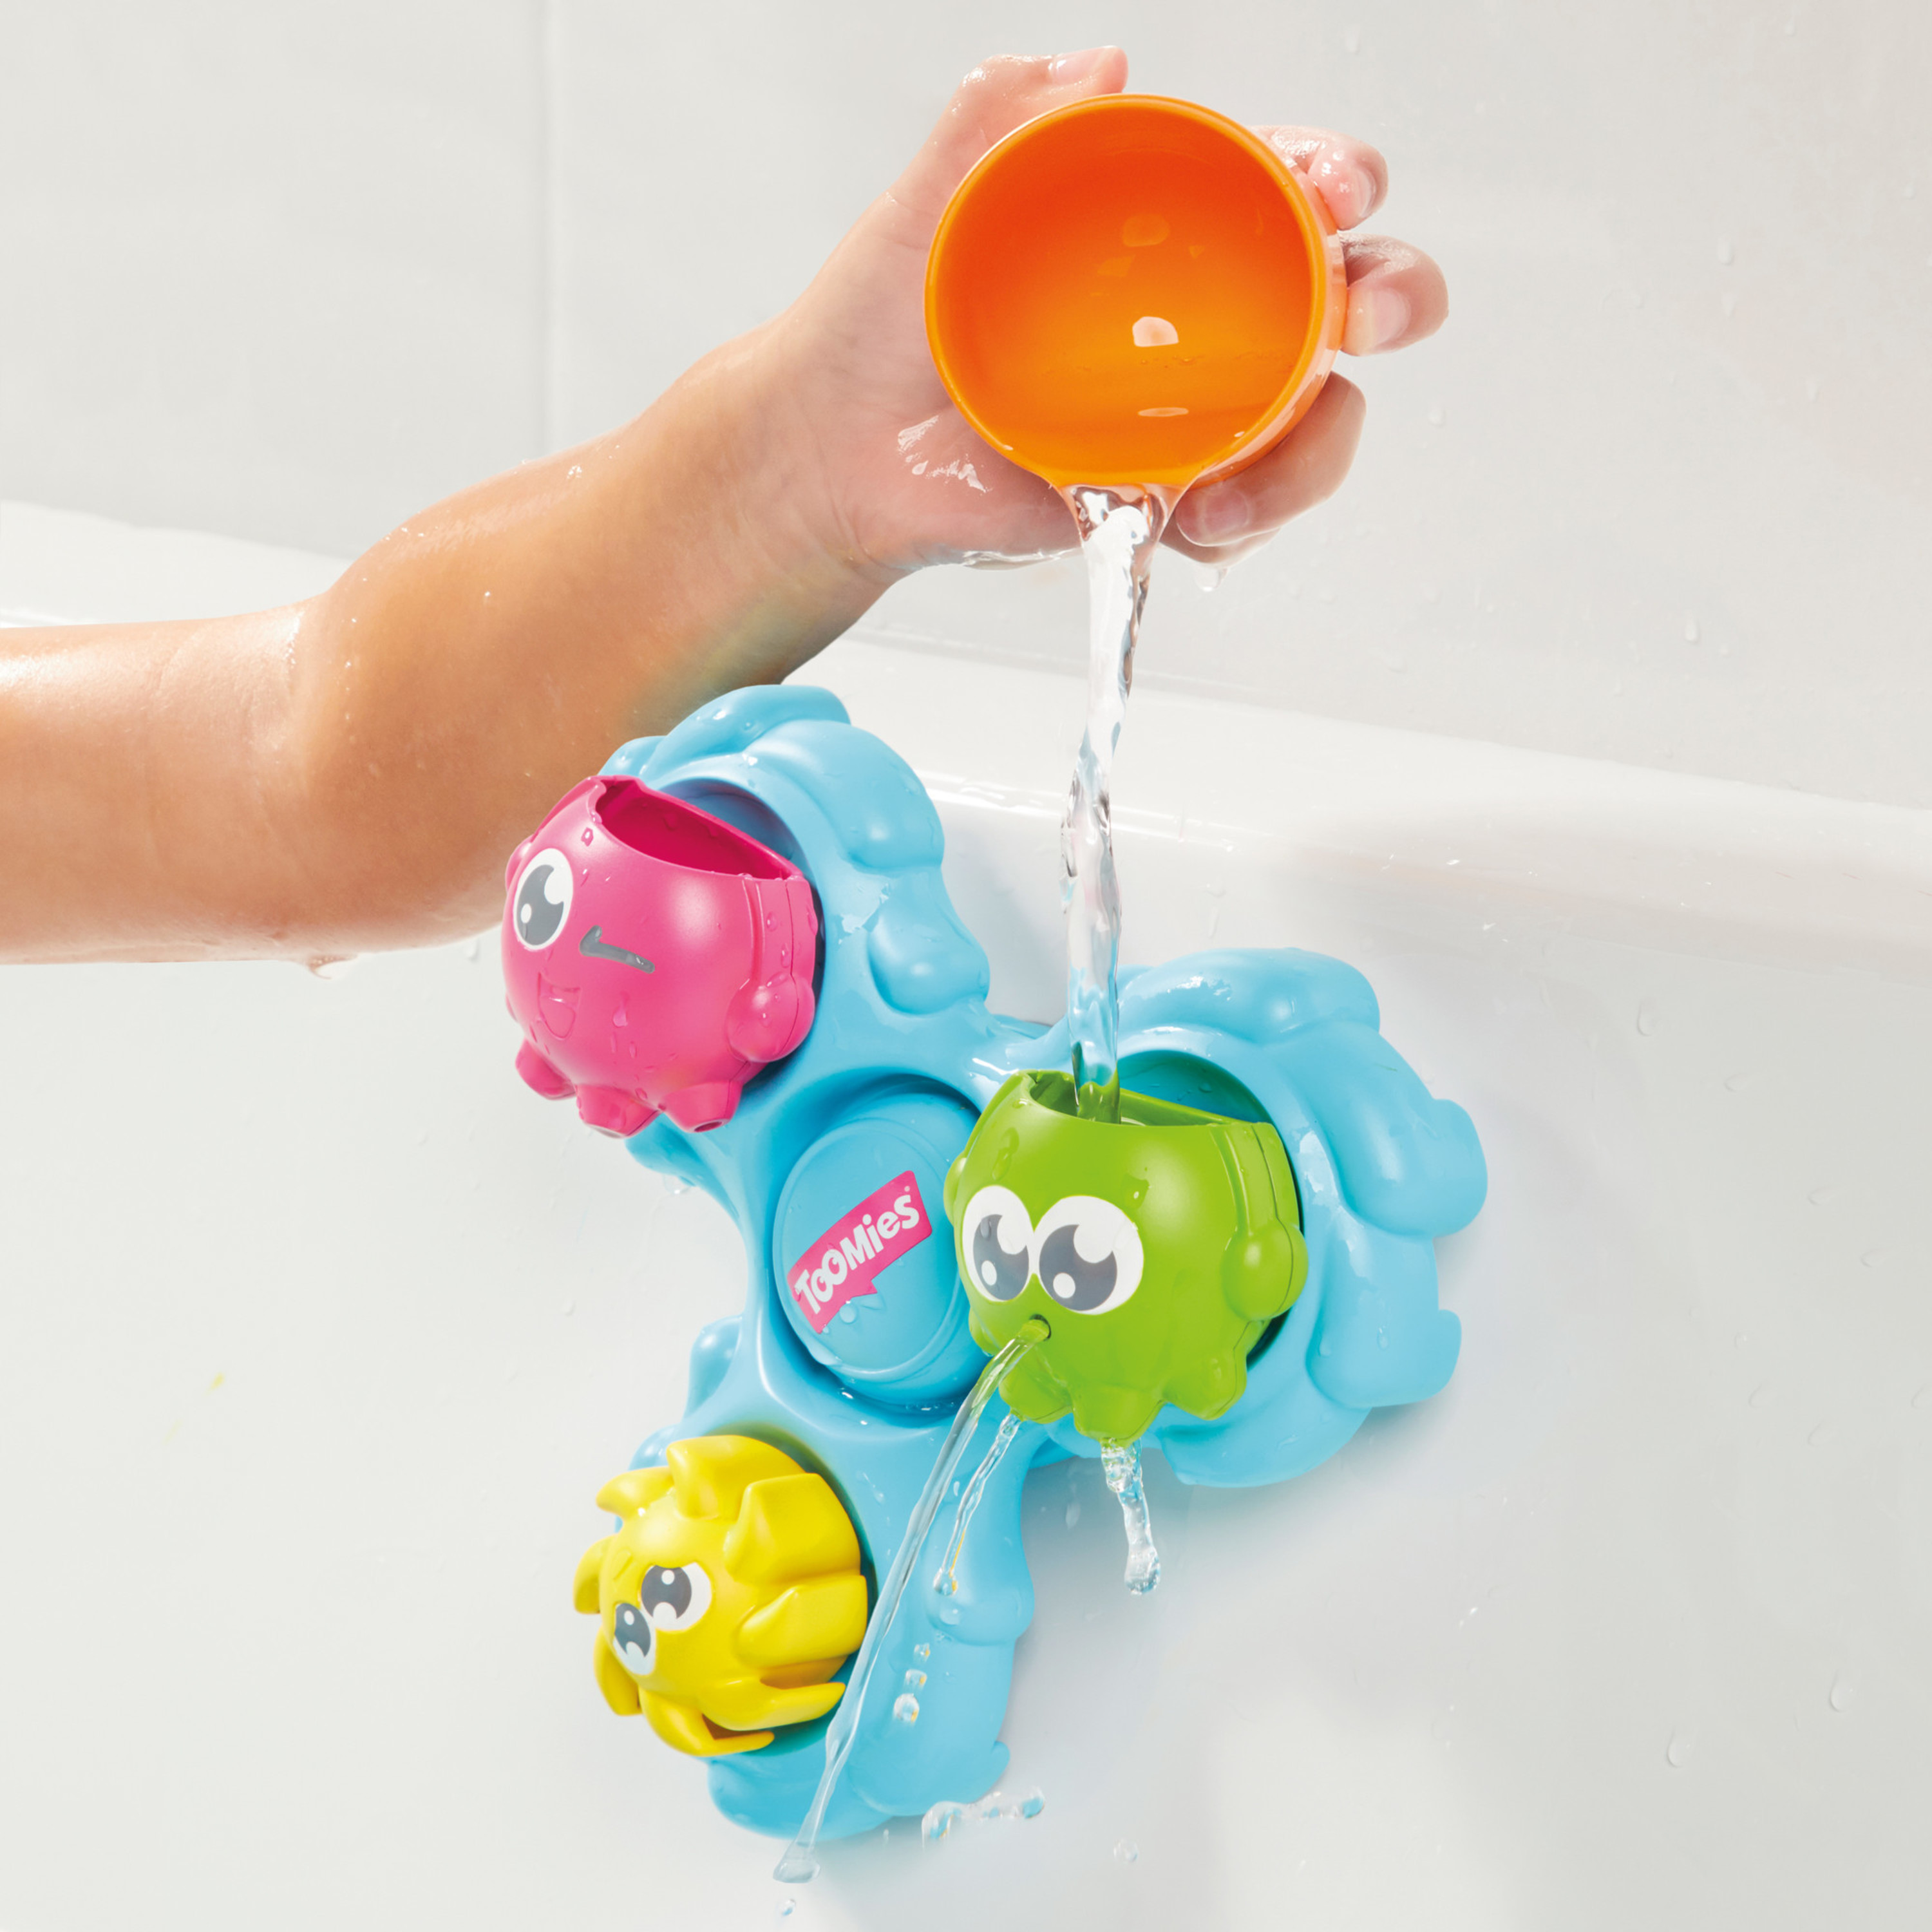 TOMY Toomies Spin And Splash Octopals Bath Toy, Colorful and Fun Toddler Bath Toys - image 4 of 6